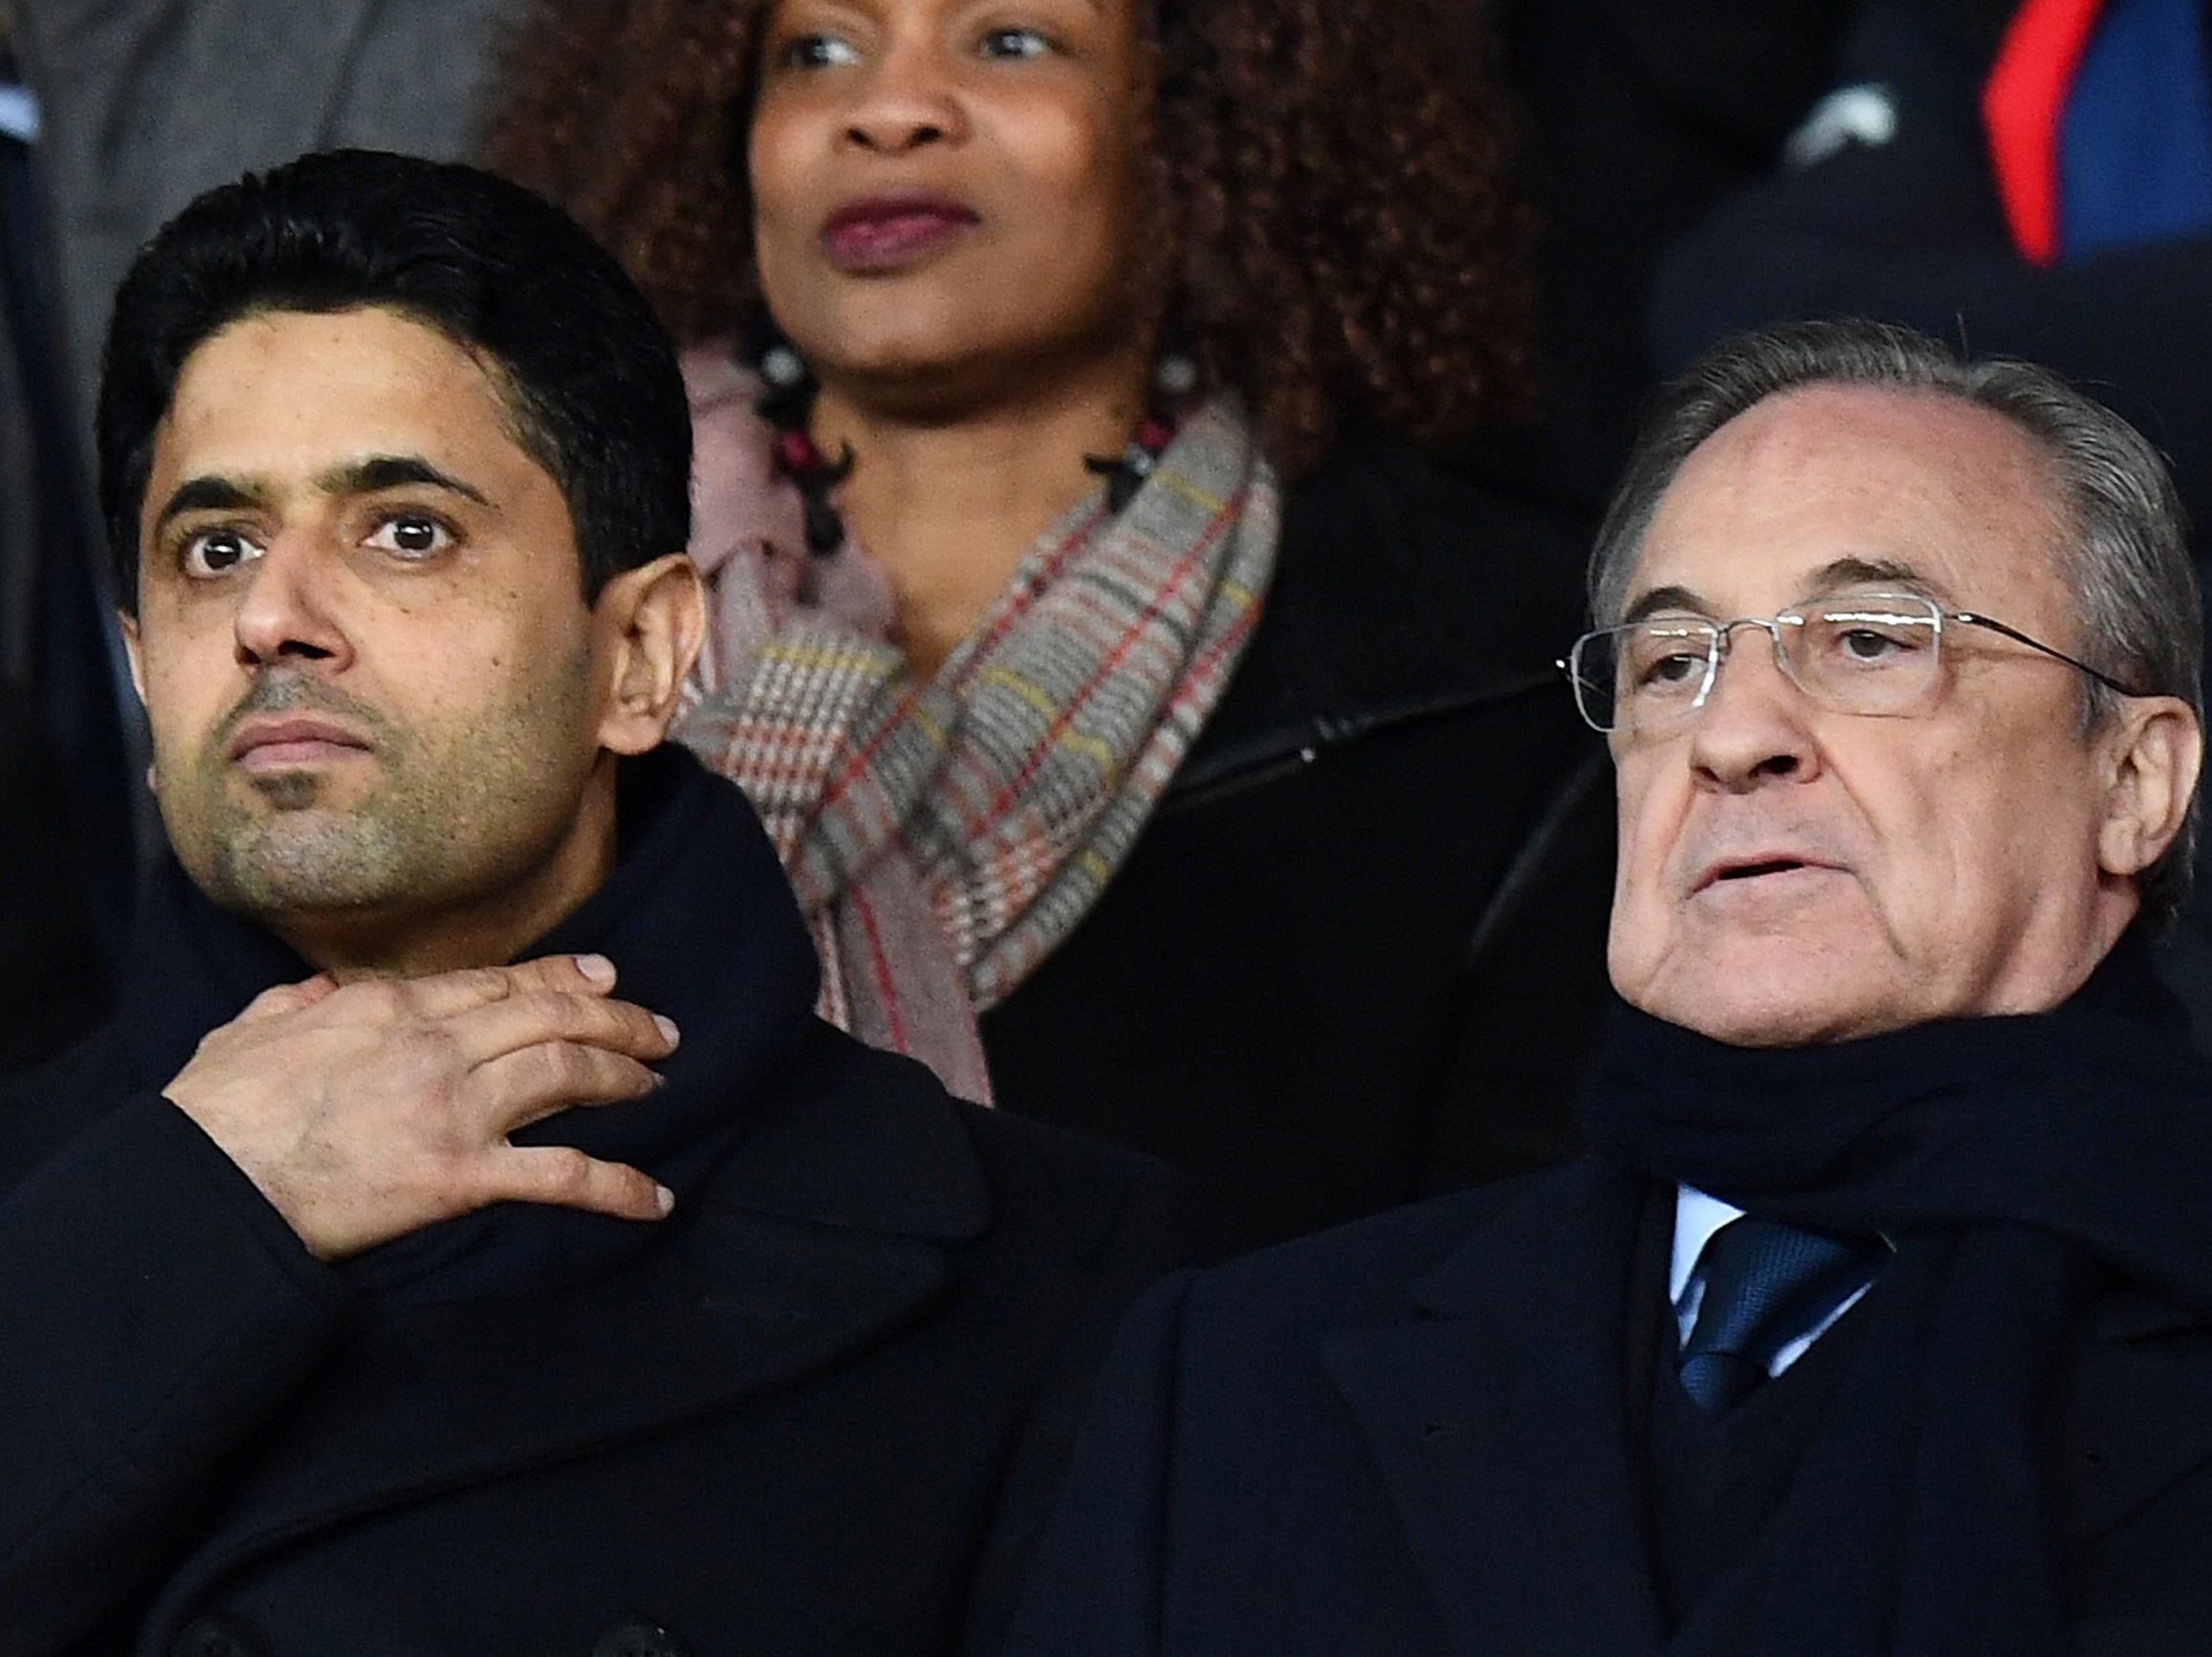 Nasser Al-Khelaifi (left) and Florentino Perez, presidents of PSG and Real Madrid, have a better relationship than many would expect